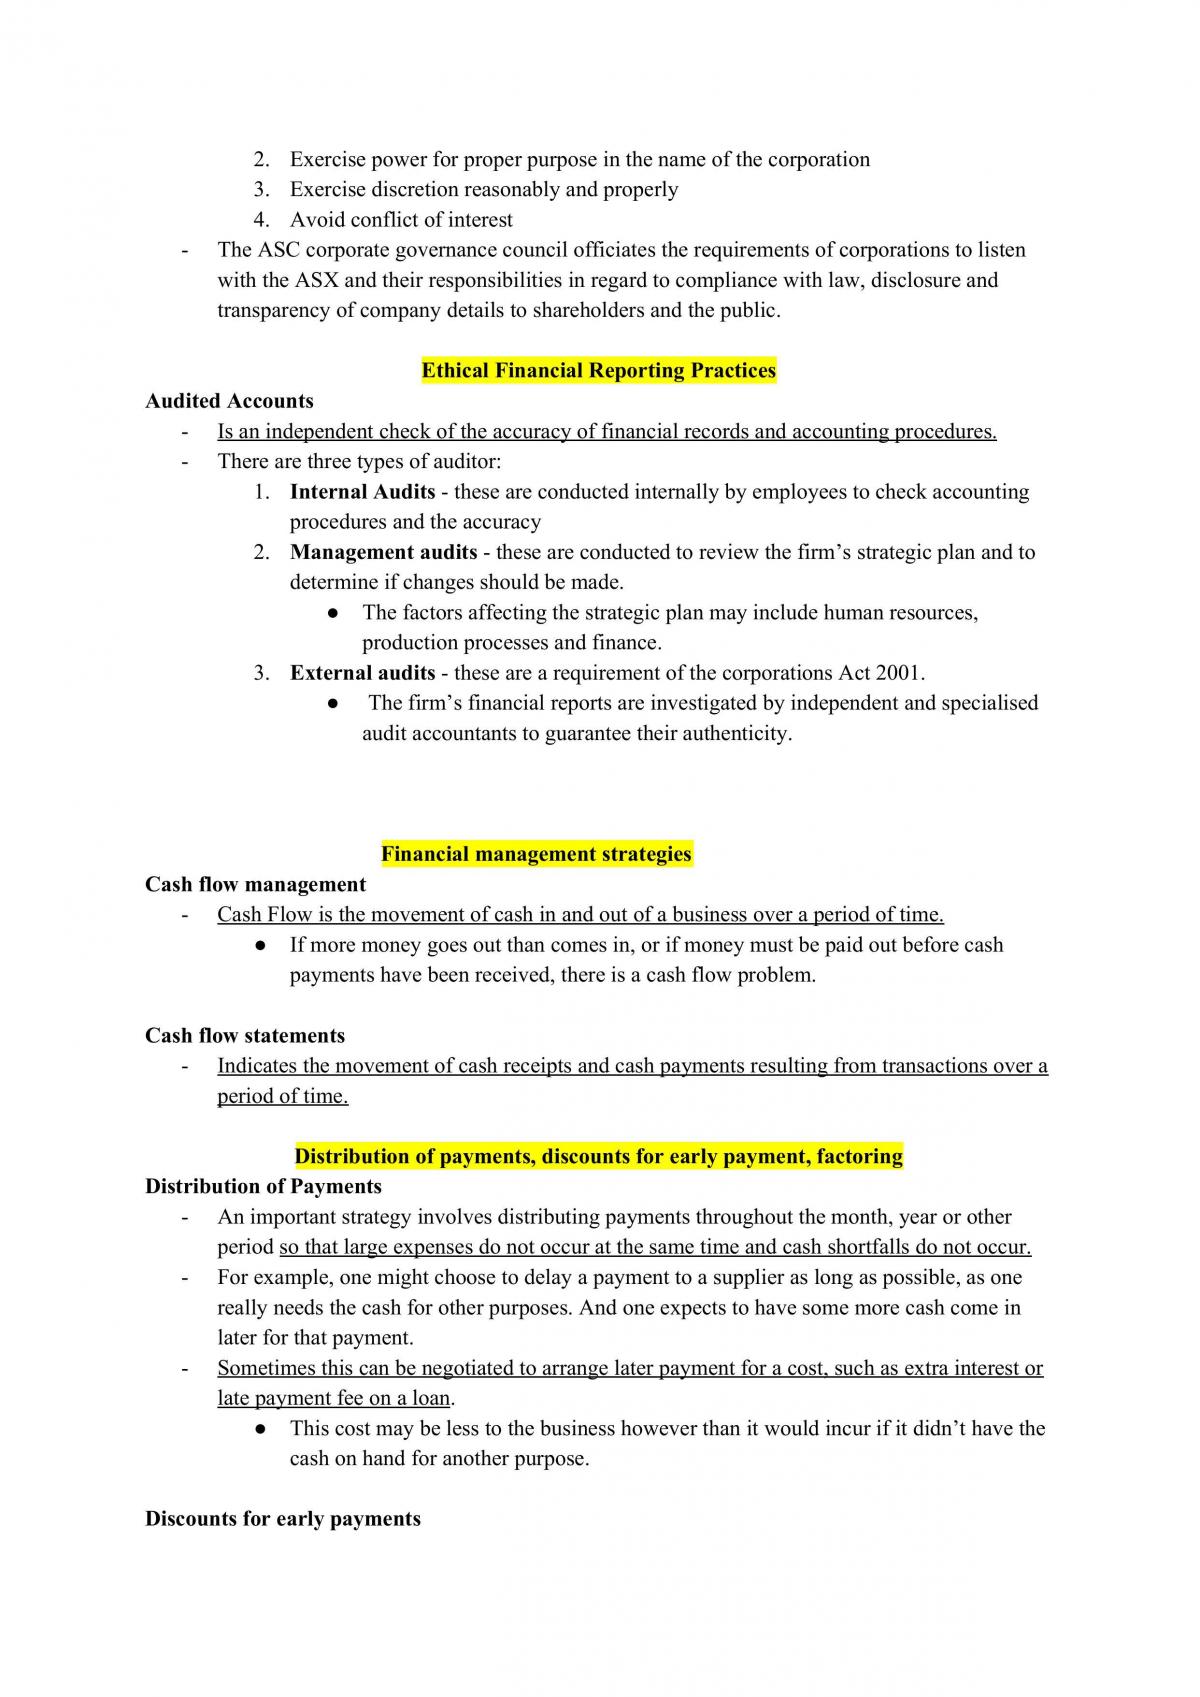 HSC Finance Topic Notes (Complete) - Page 24